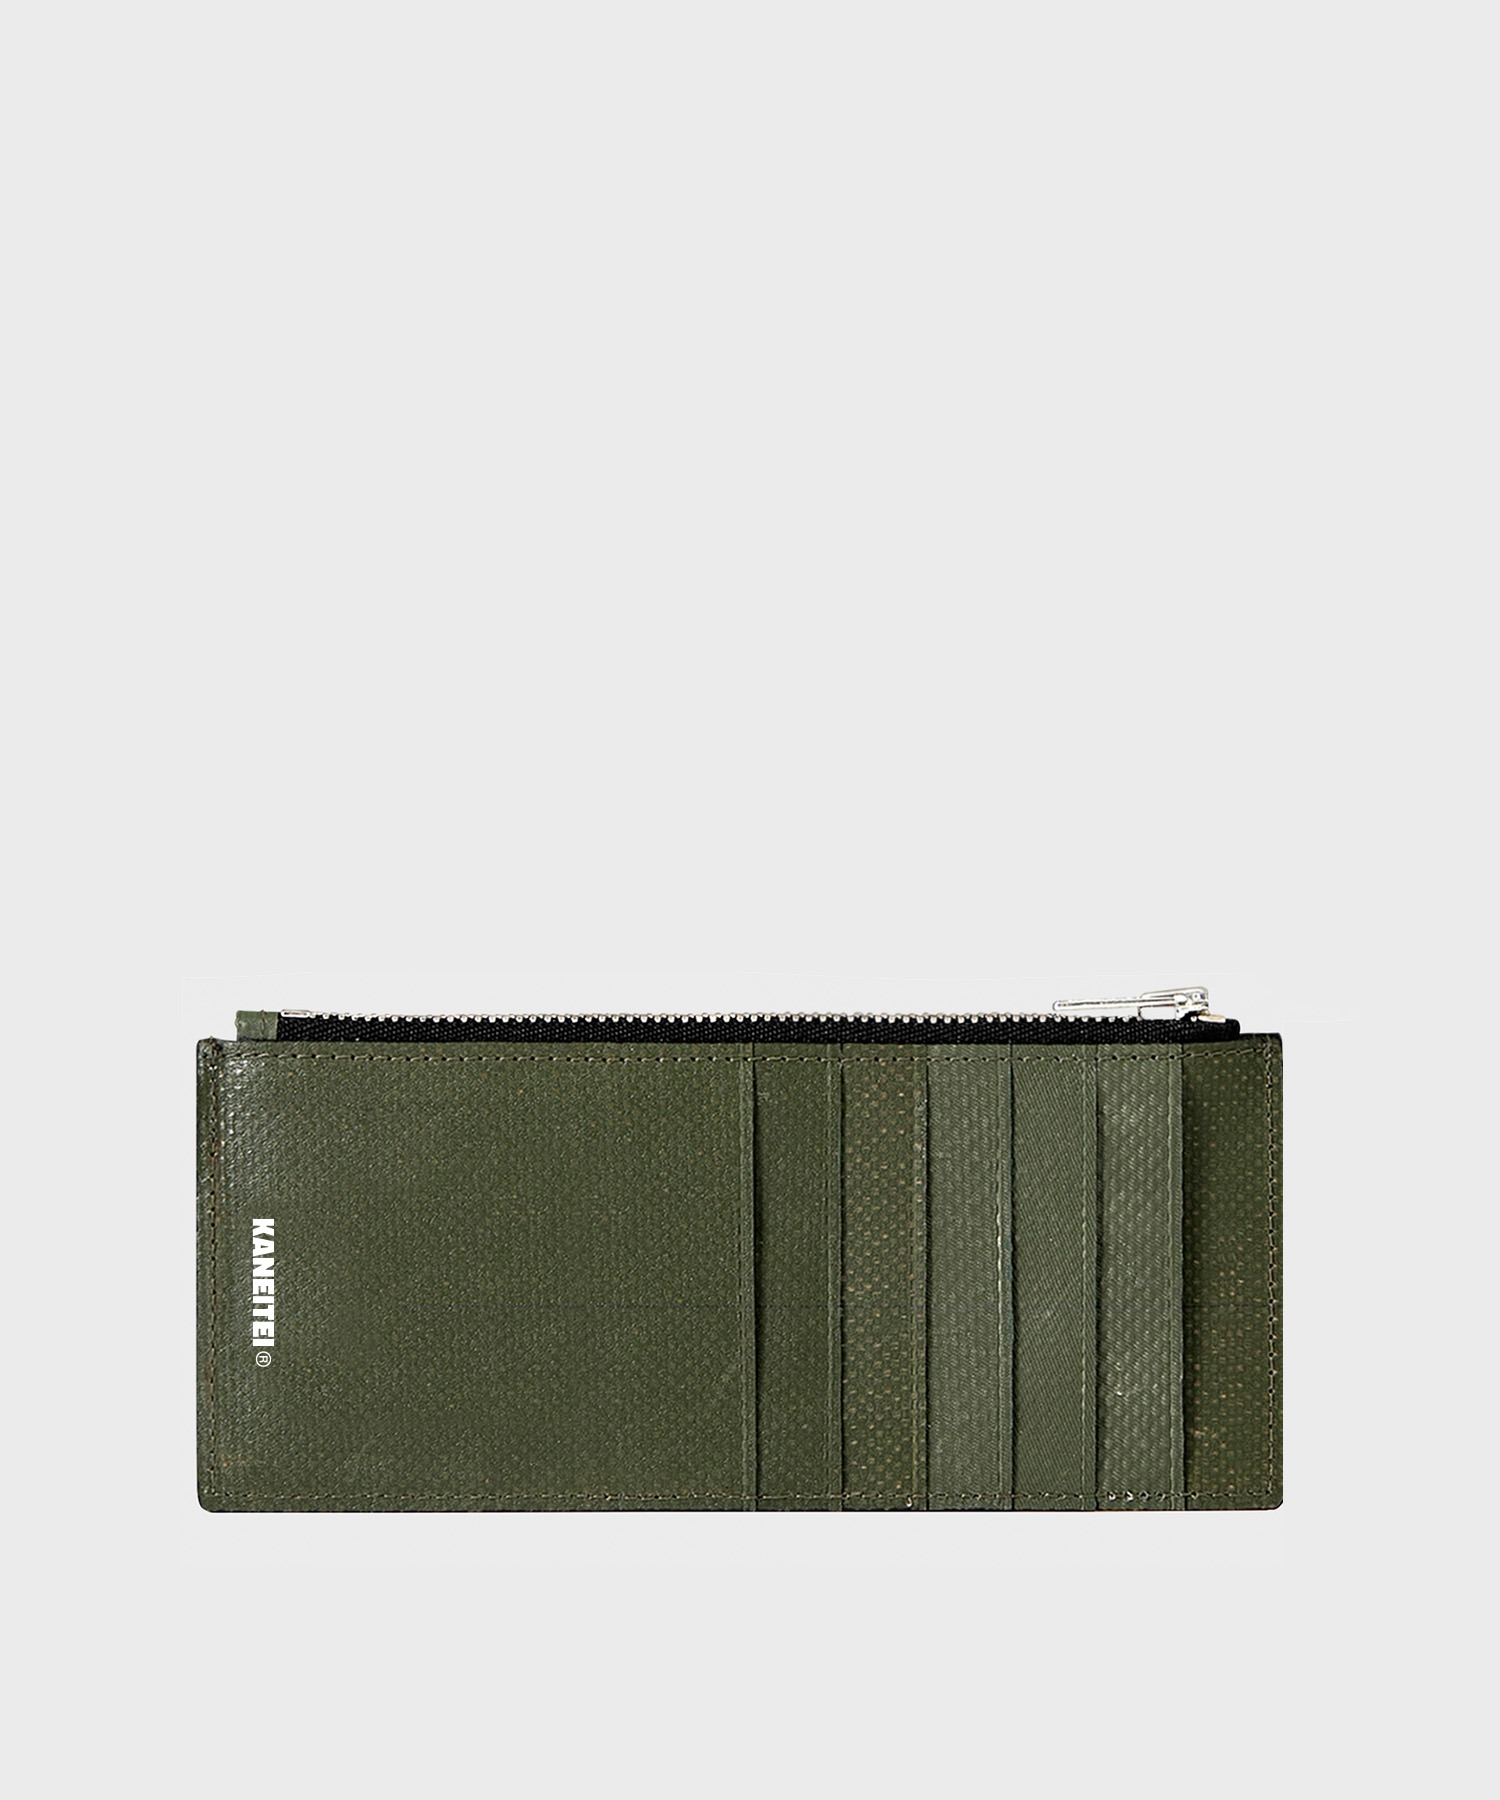 HERB FLAT ZIP WALLET (OLIVE DRAB) / UPCYCLED